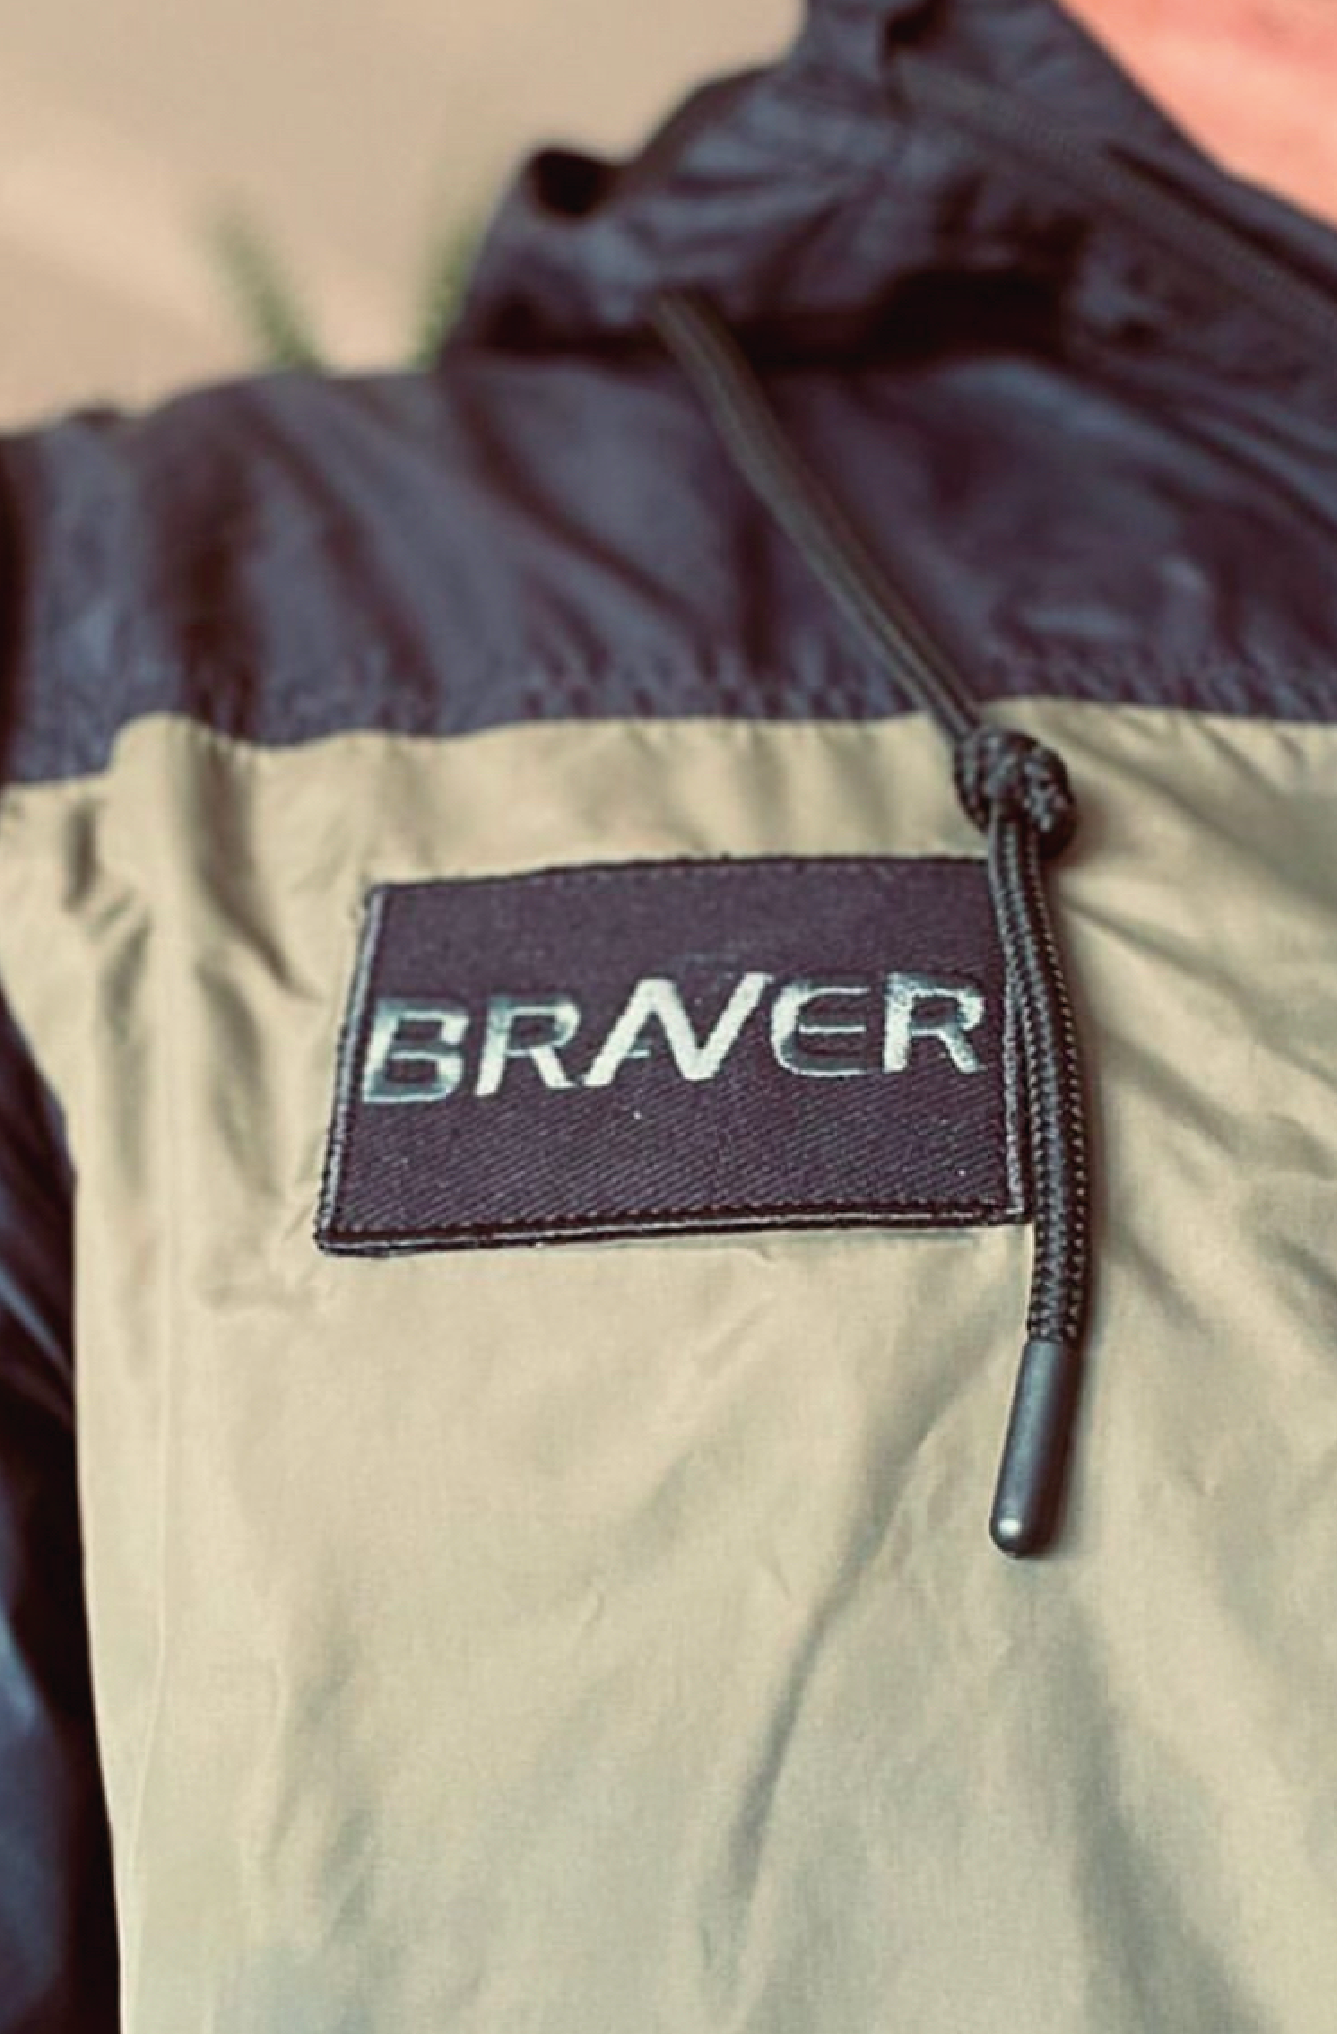 Braver velcro patch sewn onto an outdoor jacket